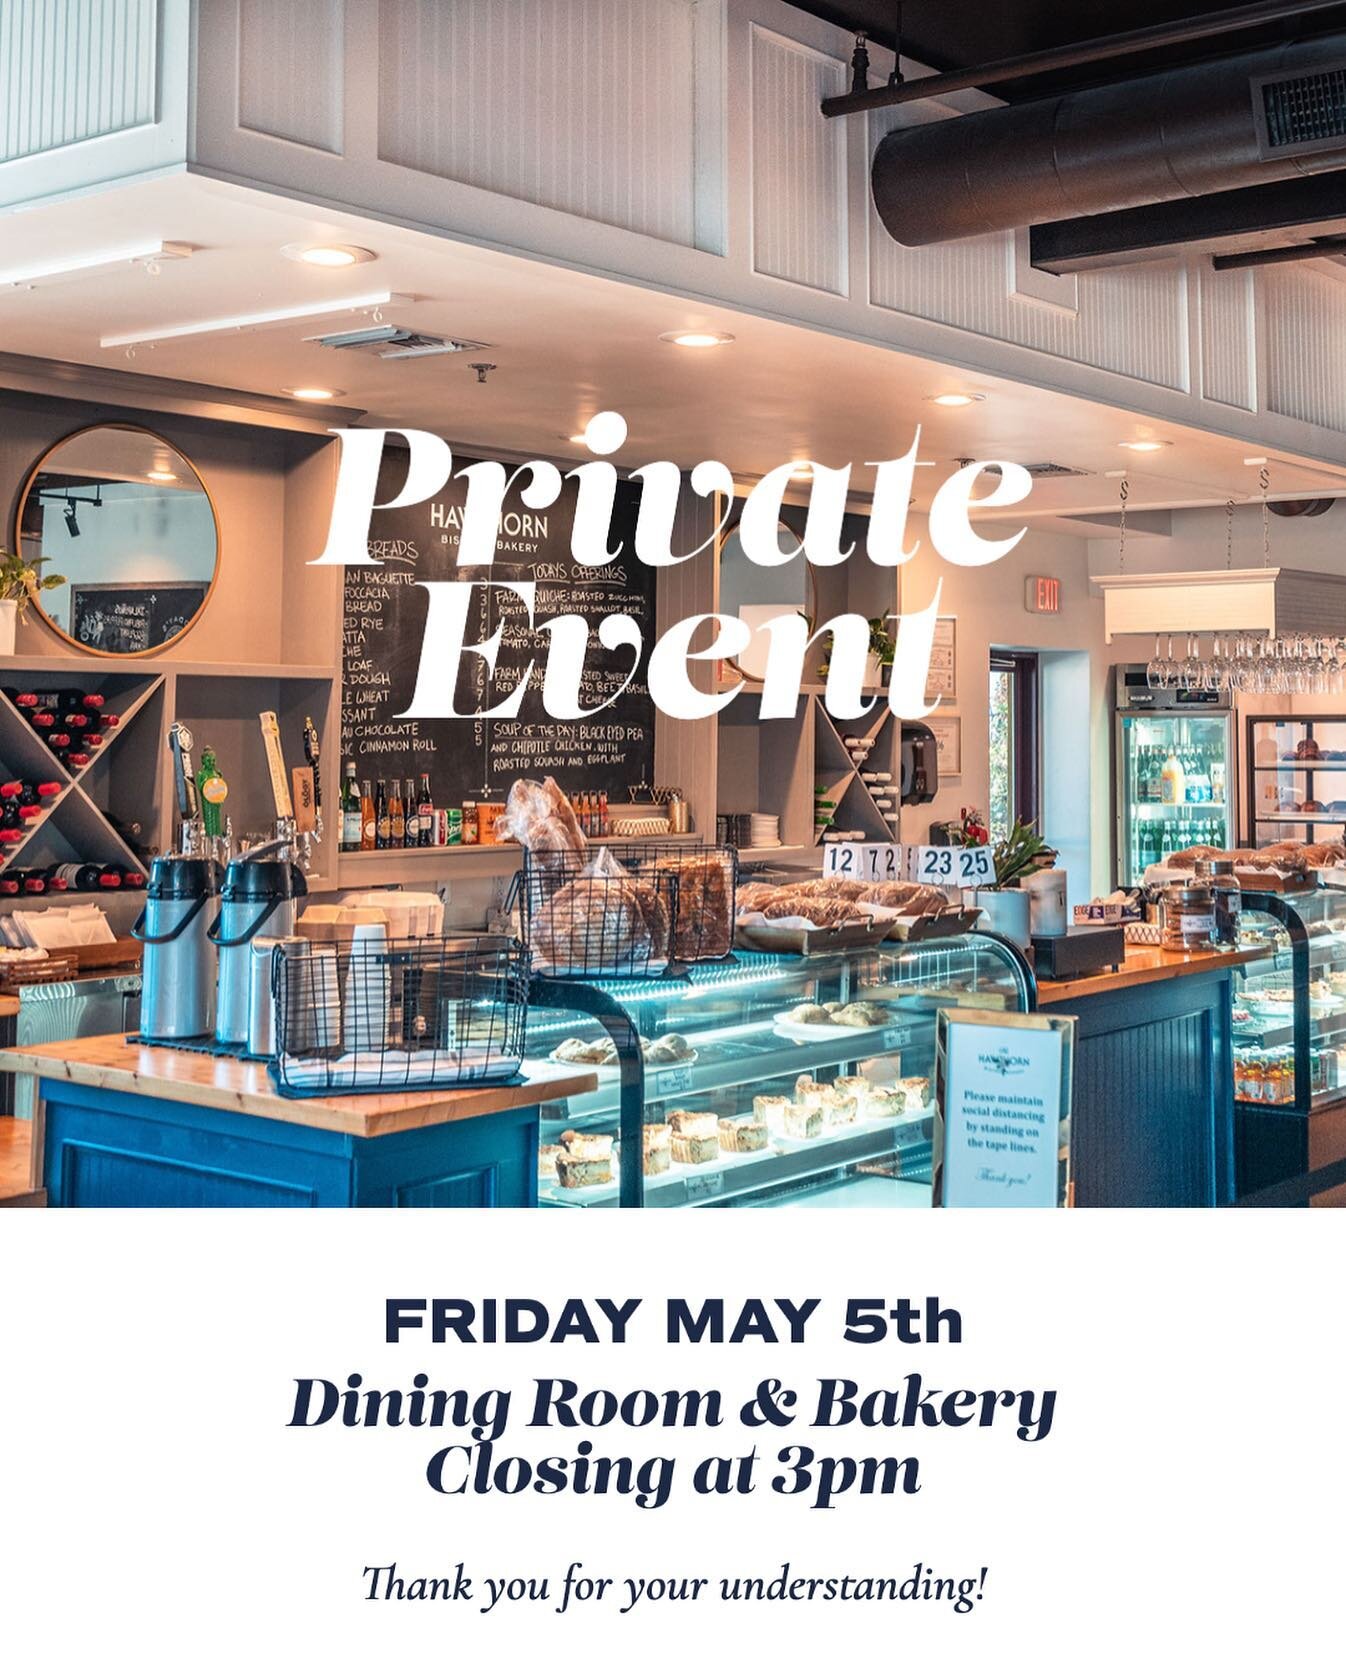 Our dining room will be closing early this Friday (05/05) as we&rsquo;ll be hosting a private event. Our Breakfast Menu will be available as usual, 9am-11pm, and Lunch will end an hour early at 3pm. (To-go only starting at 2:30pm)

Thank you for your